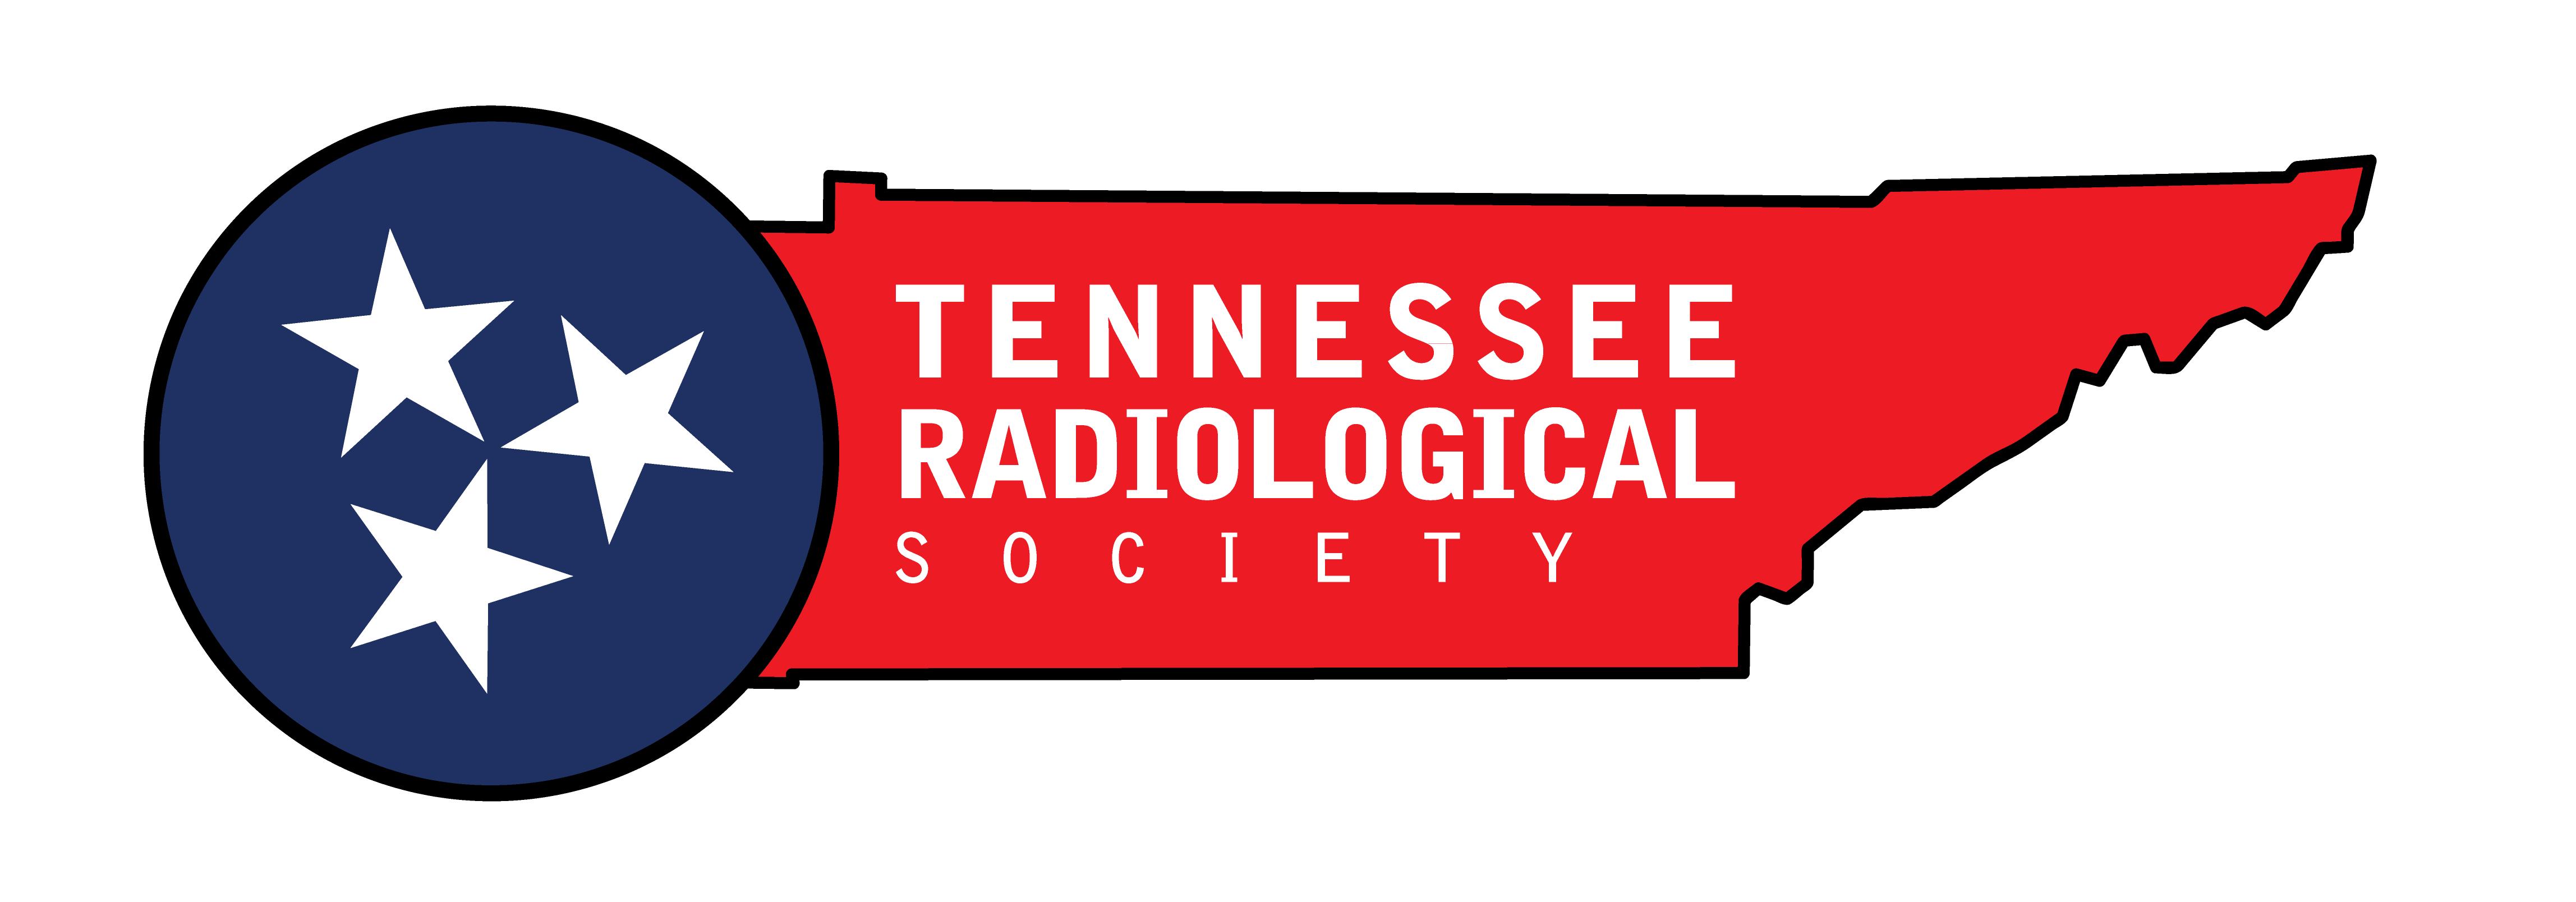 Tennessee Radiological Society